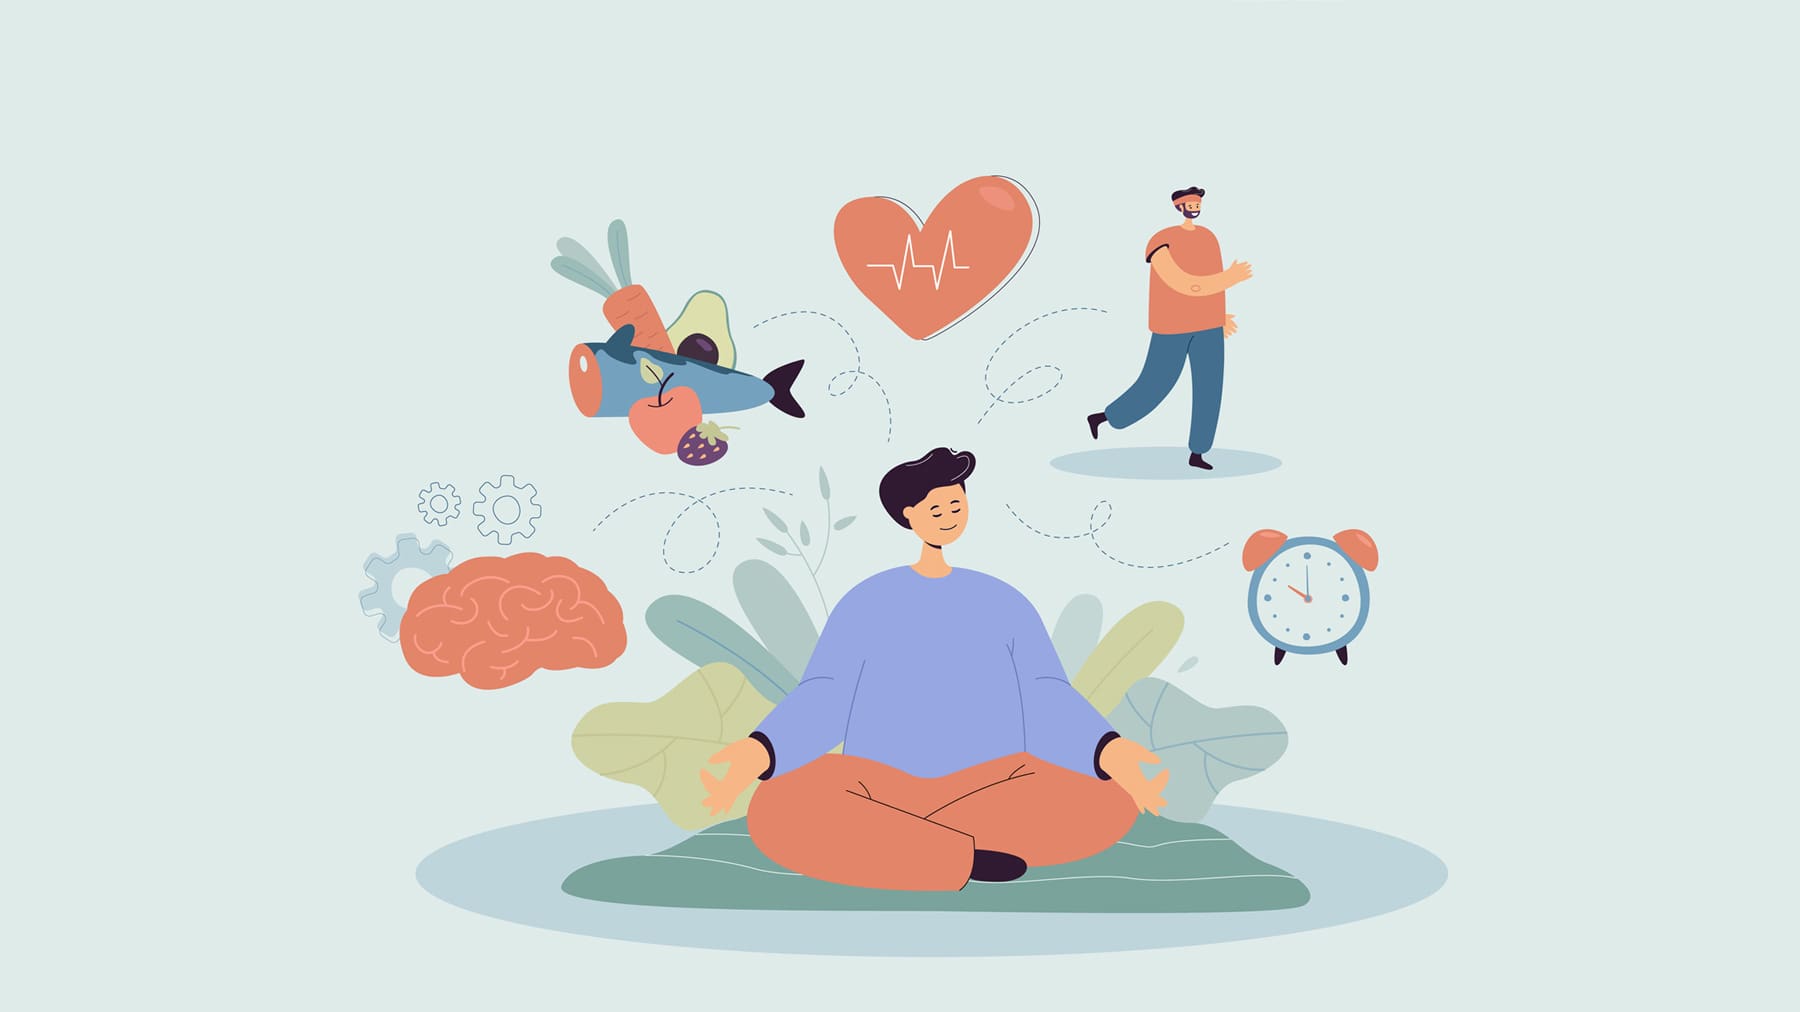 Vector illustration showing person meditating, surrounded by a clock, person running, heart, healthy food, and brain